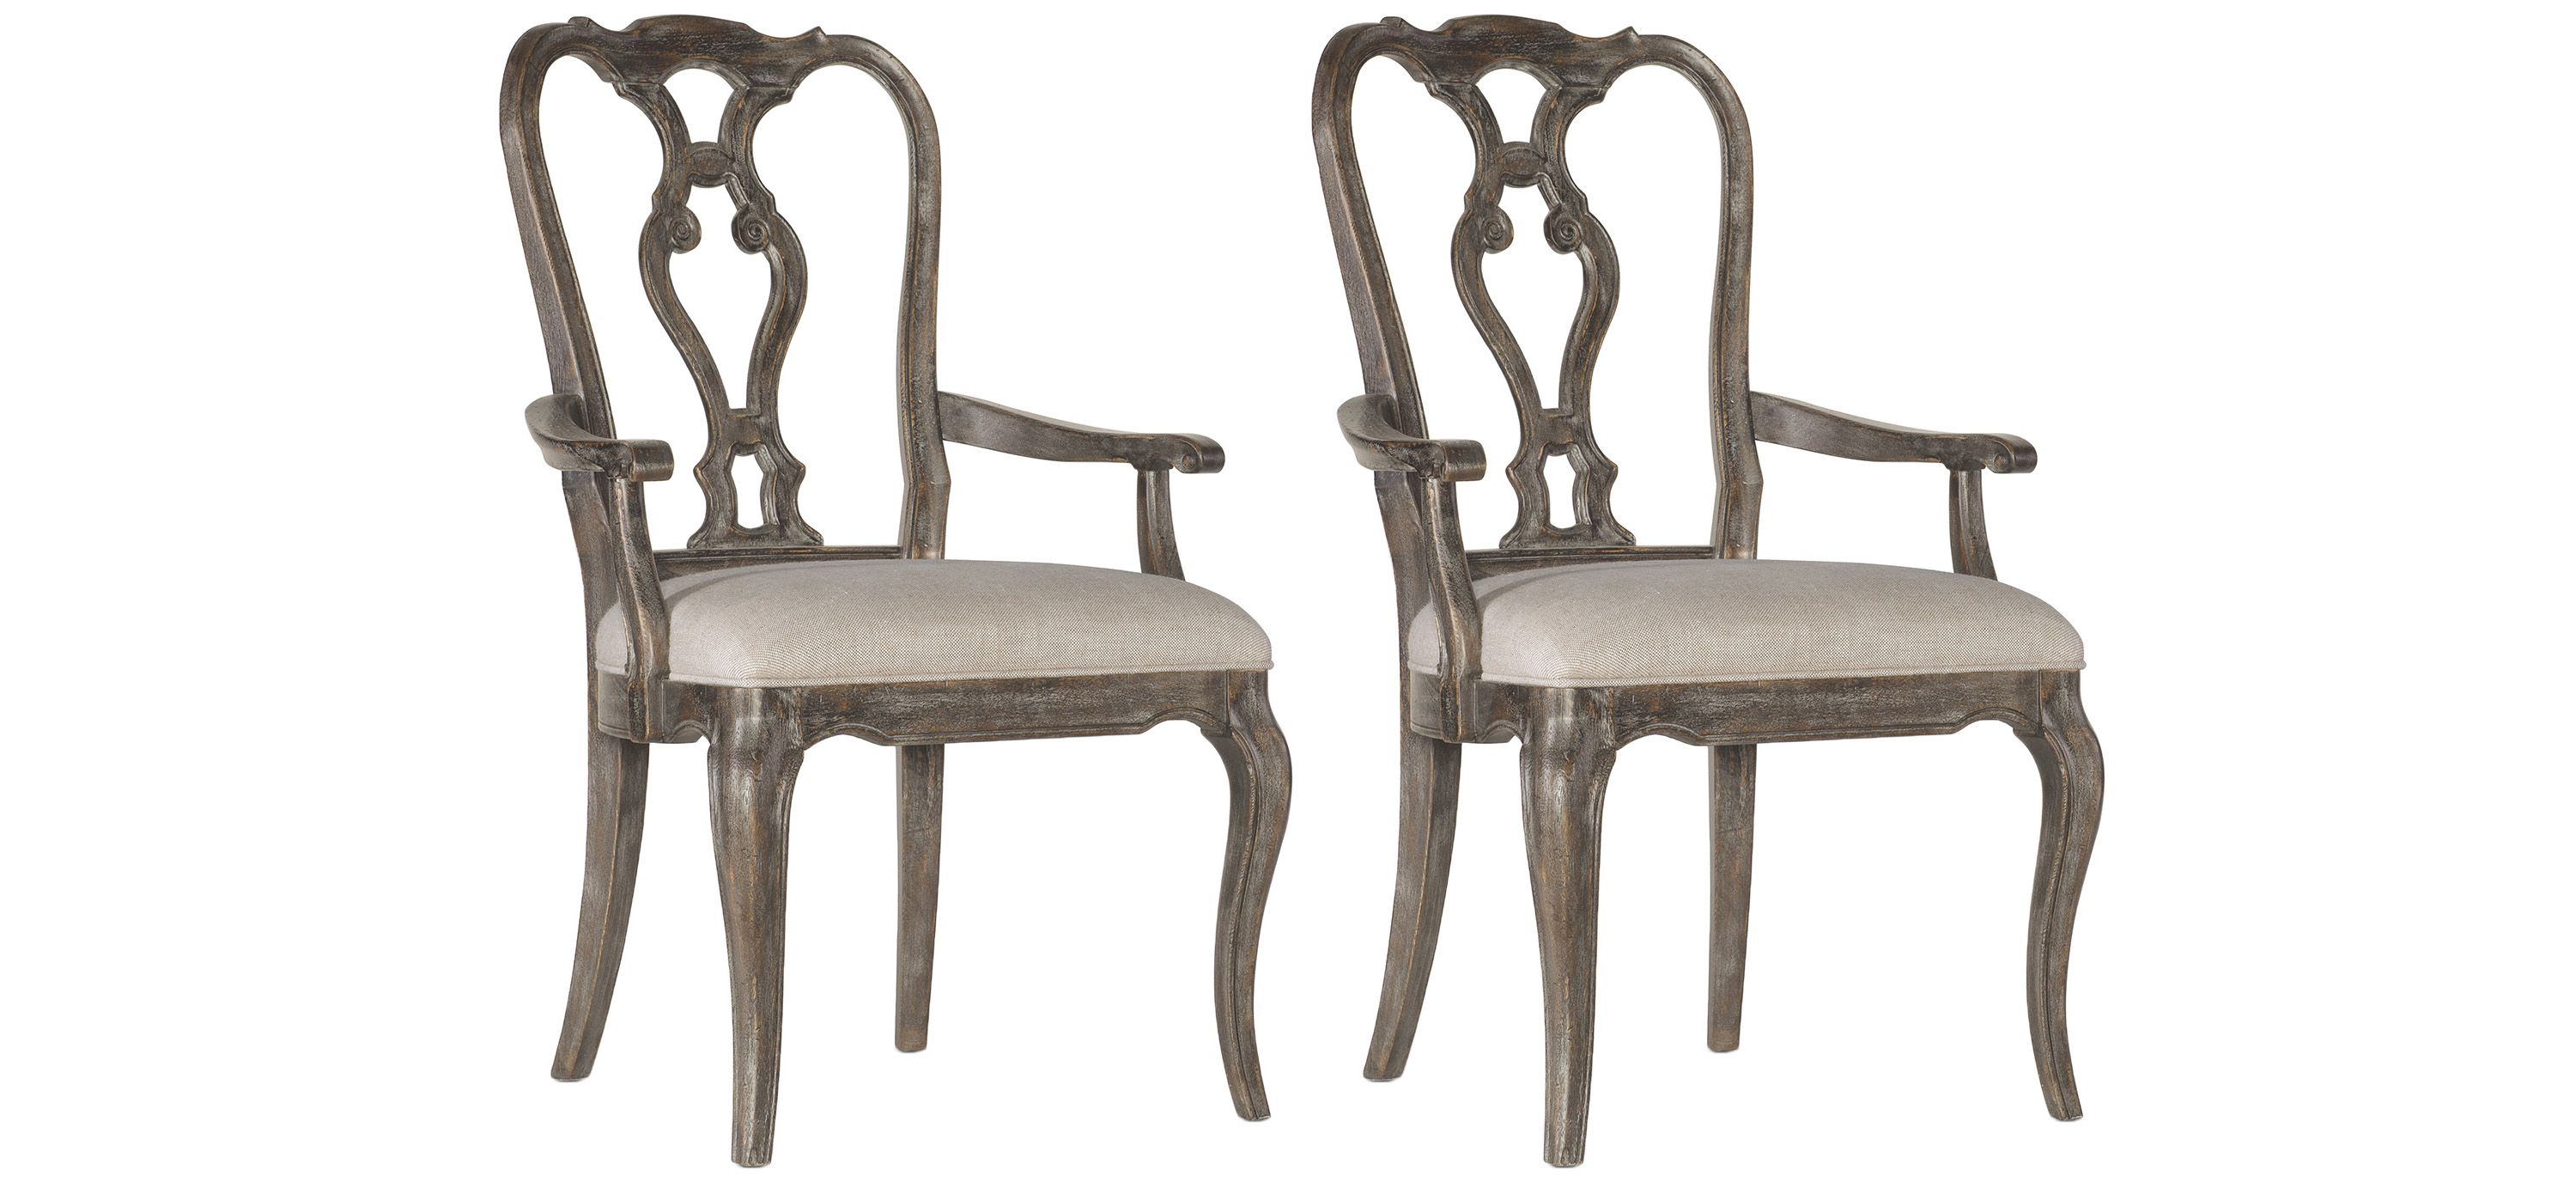 Traditions Arm Chair-Set of 2